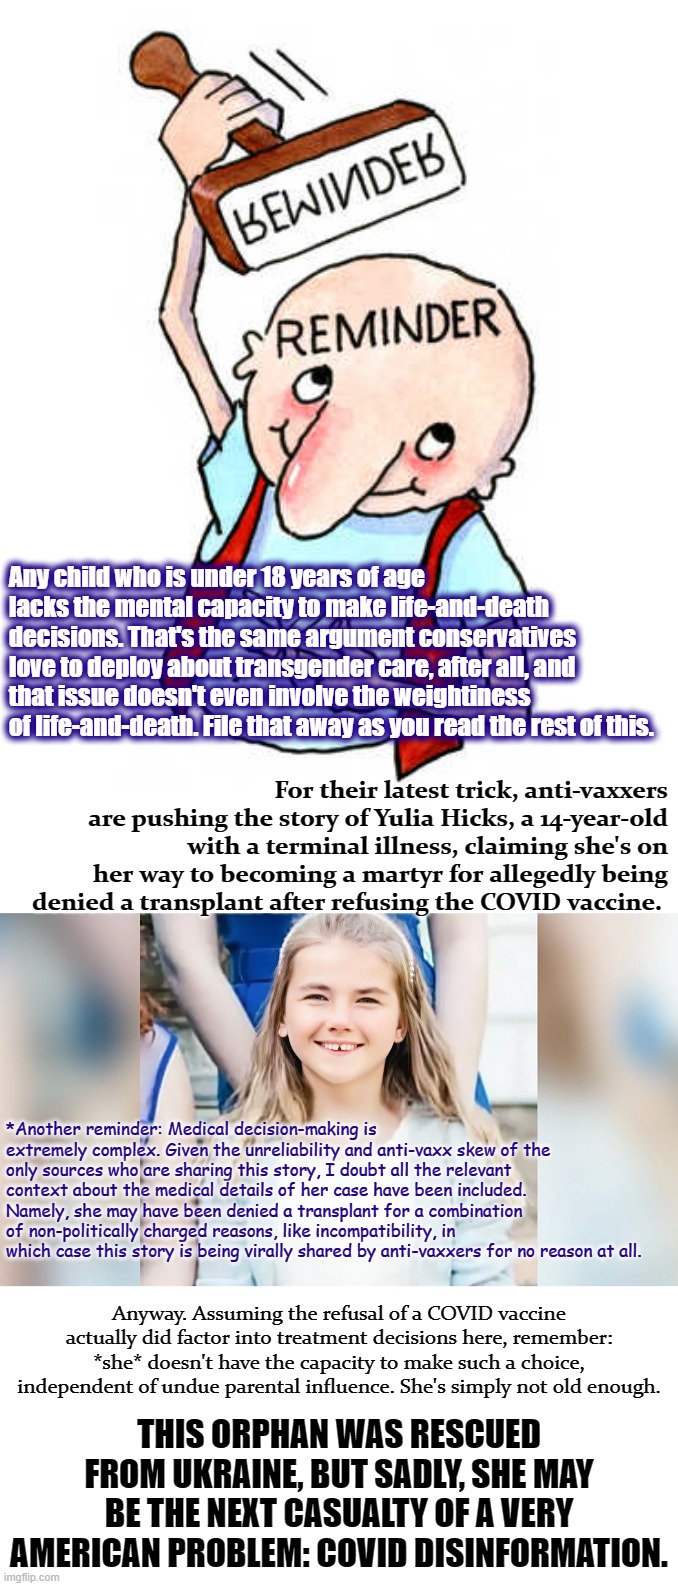 From what I've read, this girl is still alive. Tl;dr - these parents should be referred to child protective services. | Any child who is under 18 years of age lacks the mental capacity to make life-and-death decisions. That's the same argument conservatives love to deploy about transgender care, after all, and that issue doesn't even involve the weightiness of life-and-death. File that away as you read the rest of this. For their latest trick, anti-vaxxers are pushing the story of Yulia Hicks, a 14-year-old with a terminal illness, claiming she's on her way to becoming a martyr for allegedly being denied a transplant after refusing the COVID vaccine. *Another reminder: Medical decision-making is extremely complex. Given the unreliability and anti-vaxx skew of the only sources who are sharing this story, I doubt all the relevant context about the medical details of her case have been included. Namely, she may have been denied a transplant for a combination of non-politically charged reasons, like incompatibility, in which case this story is being virally shared by anti-vaxxers for no reason at all. Anyway. Assuming the refusal of a COVID vaccine actually did factor into treatment decisions here, remember: *she* doesn't have the capacity to make such a choice, independent of undue parental influence. She's simply not old enough. THIS ORPHAN WAS RESCUED FROM UKRAINE, BUT SADLY, SHE MAY BE THE NEXT CASUALTY OF A VERY AMERICAN PROBLEM: COVID DISINFORMATION. | image tagged in talking to putin trolls,yulia hicks,covid,covid-19,coronavirus,anti-vaxx | made w/ Imgflip meme maker